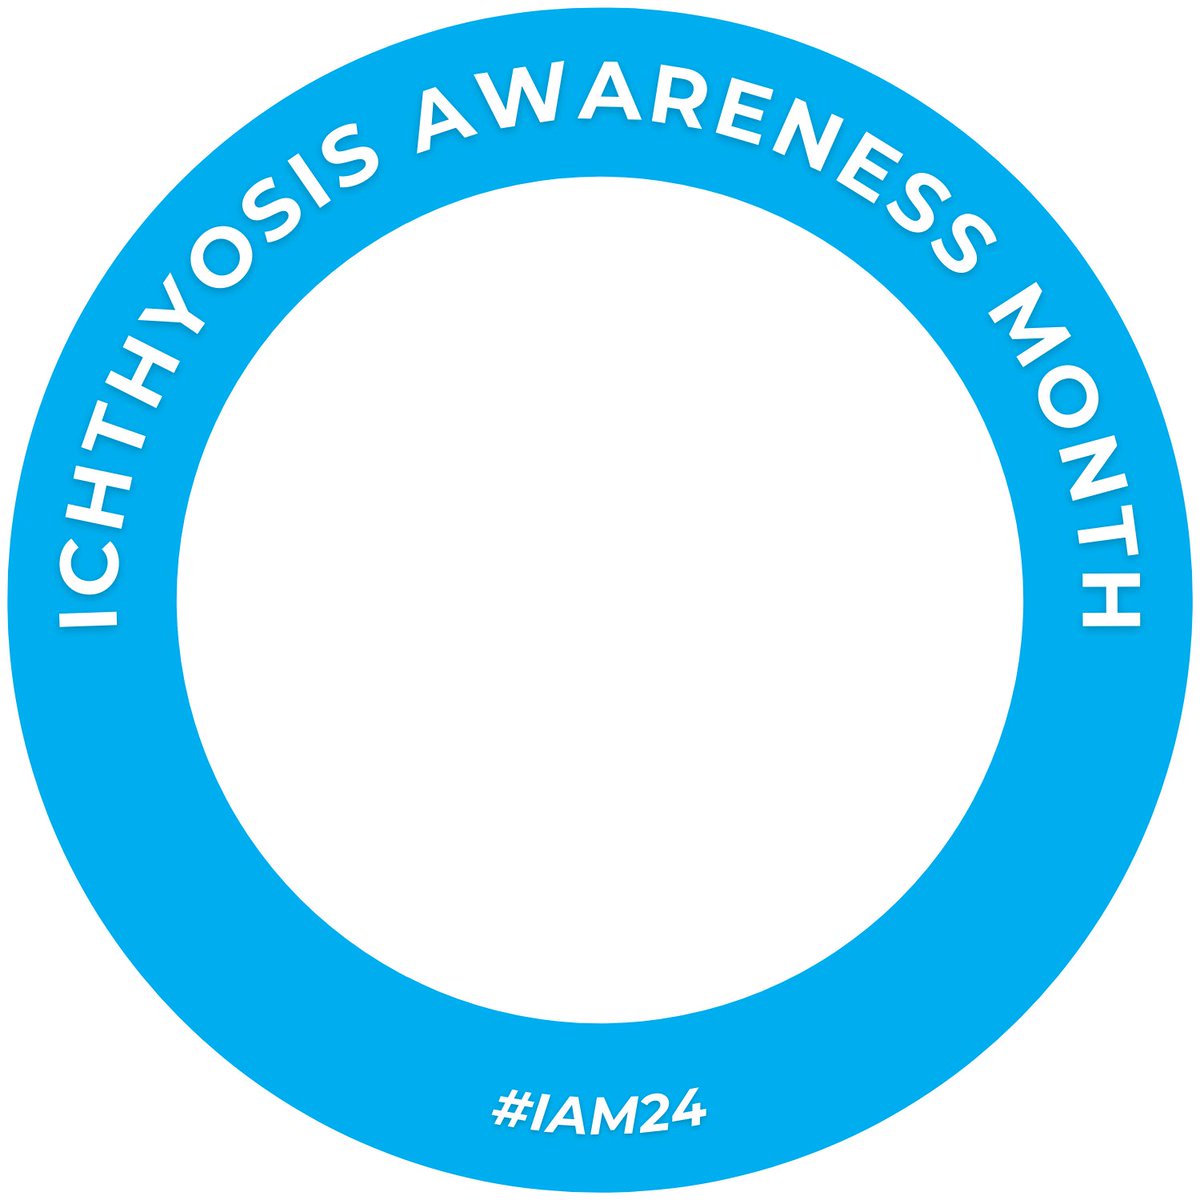 Feel free to use this frame for your profile picture for the month of May! #IAM24 #ichthyosis #raraedisease #SkinDisorder